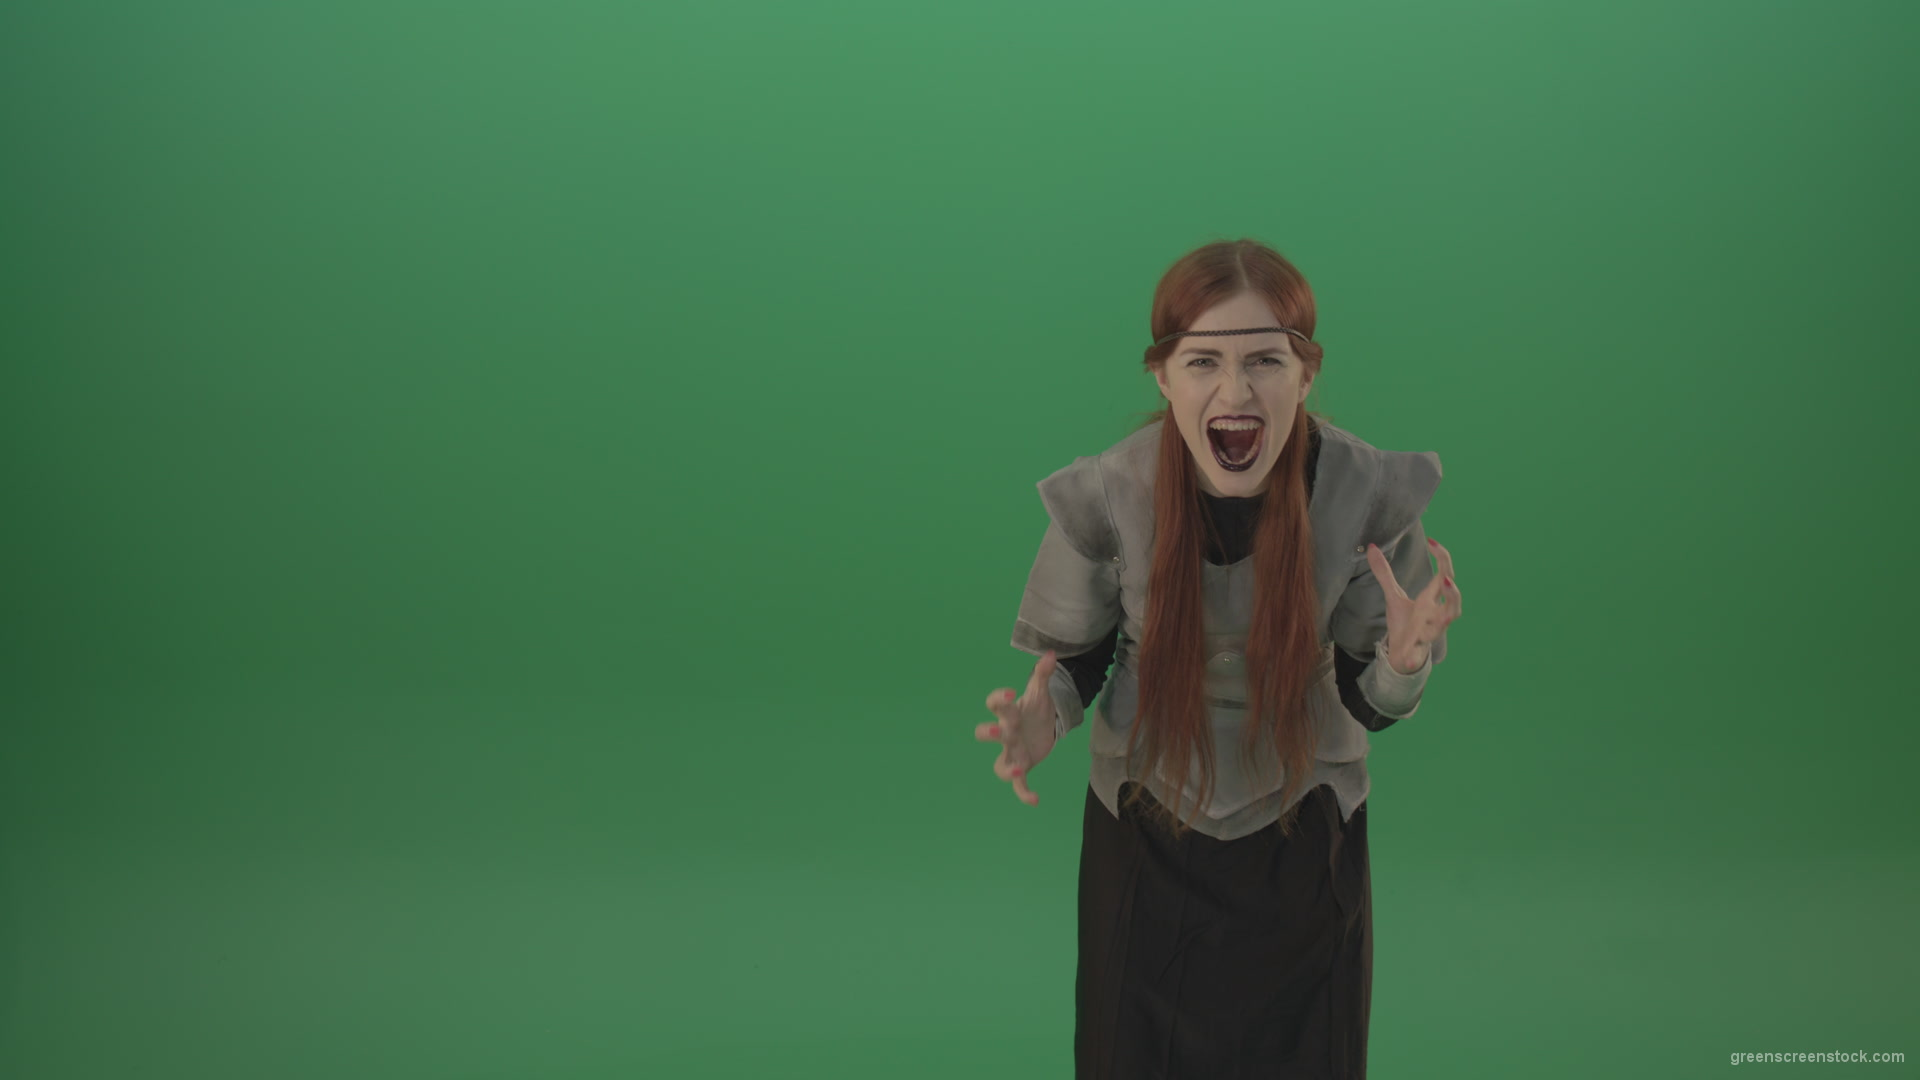 Witch-girl-watched-and-screamed-at-the-camera-with-green-eyes-on-a-green-background_008 Green Screen Stock